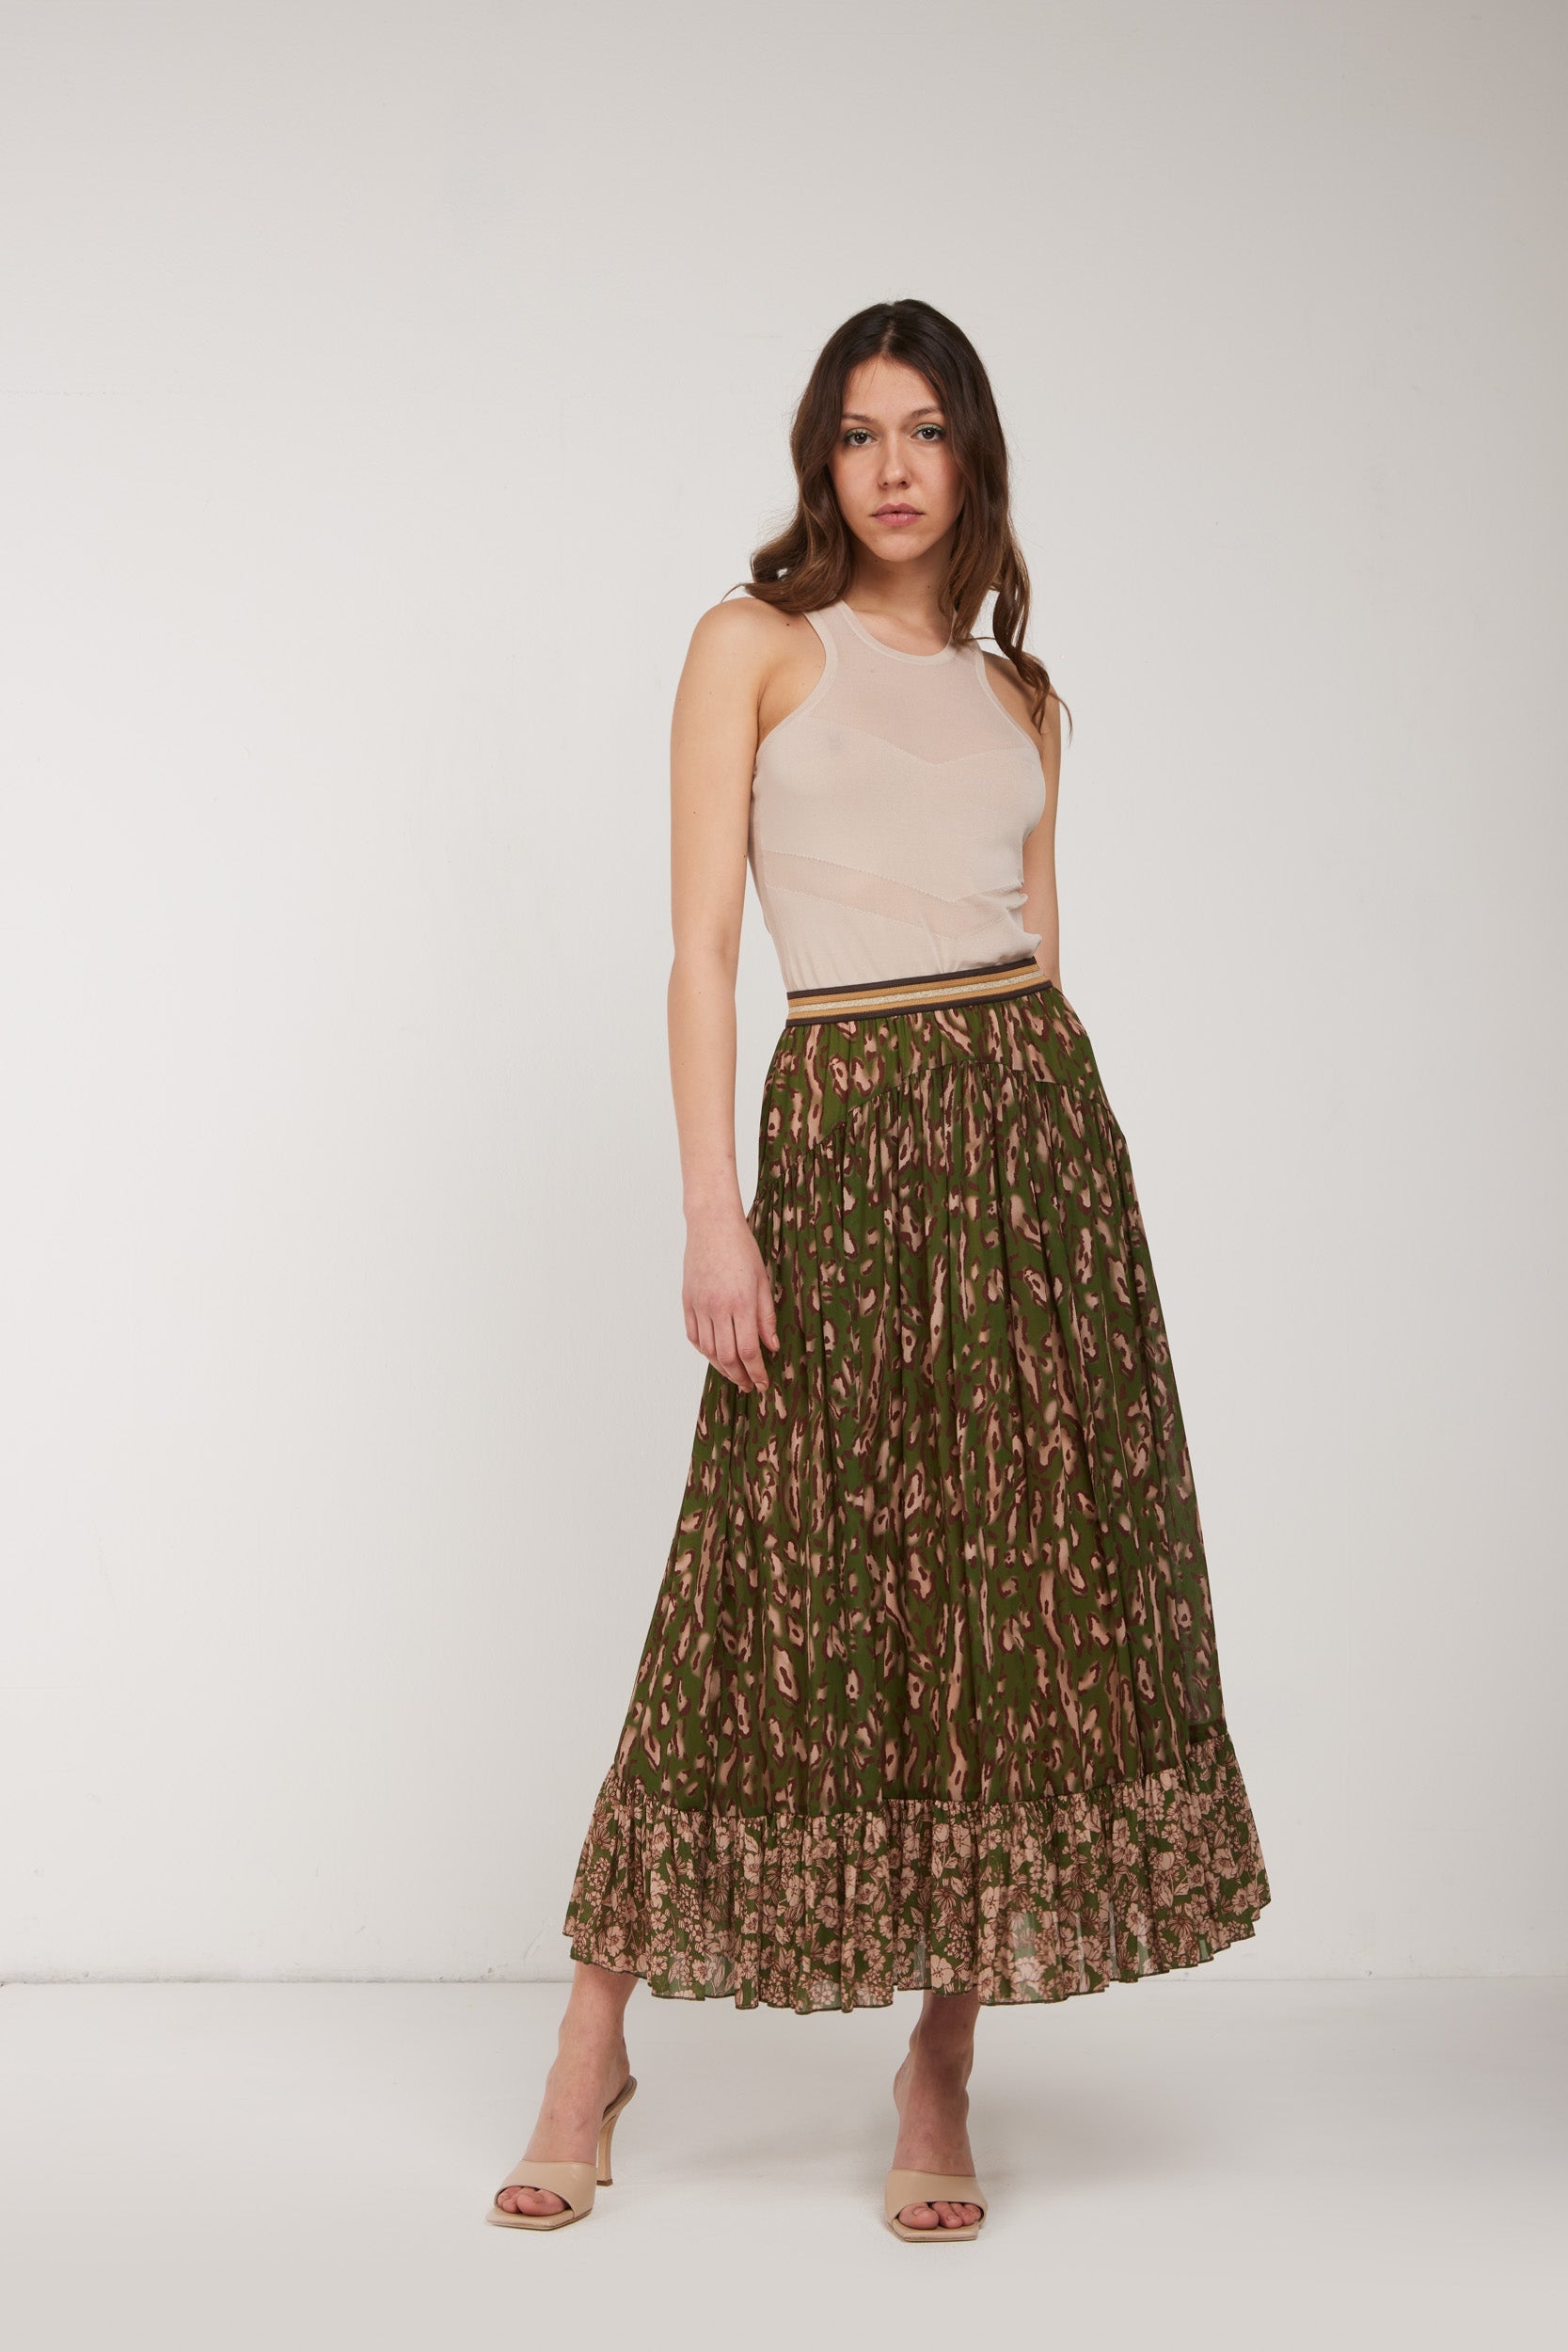 TWINSET Green Spotted Long Skirt